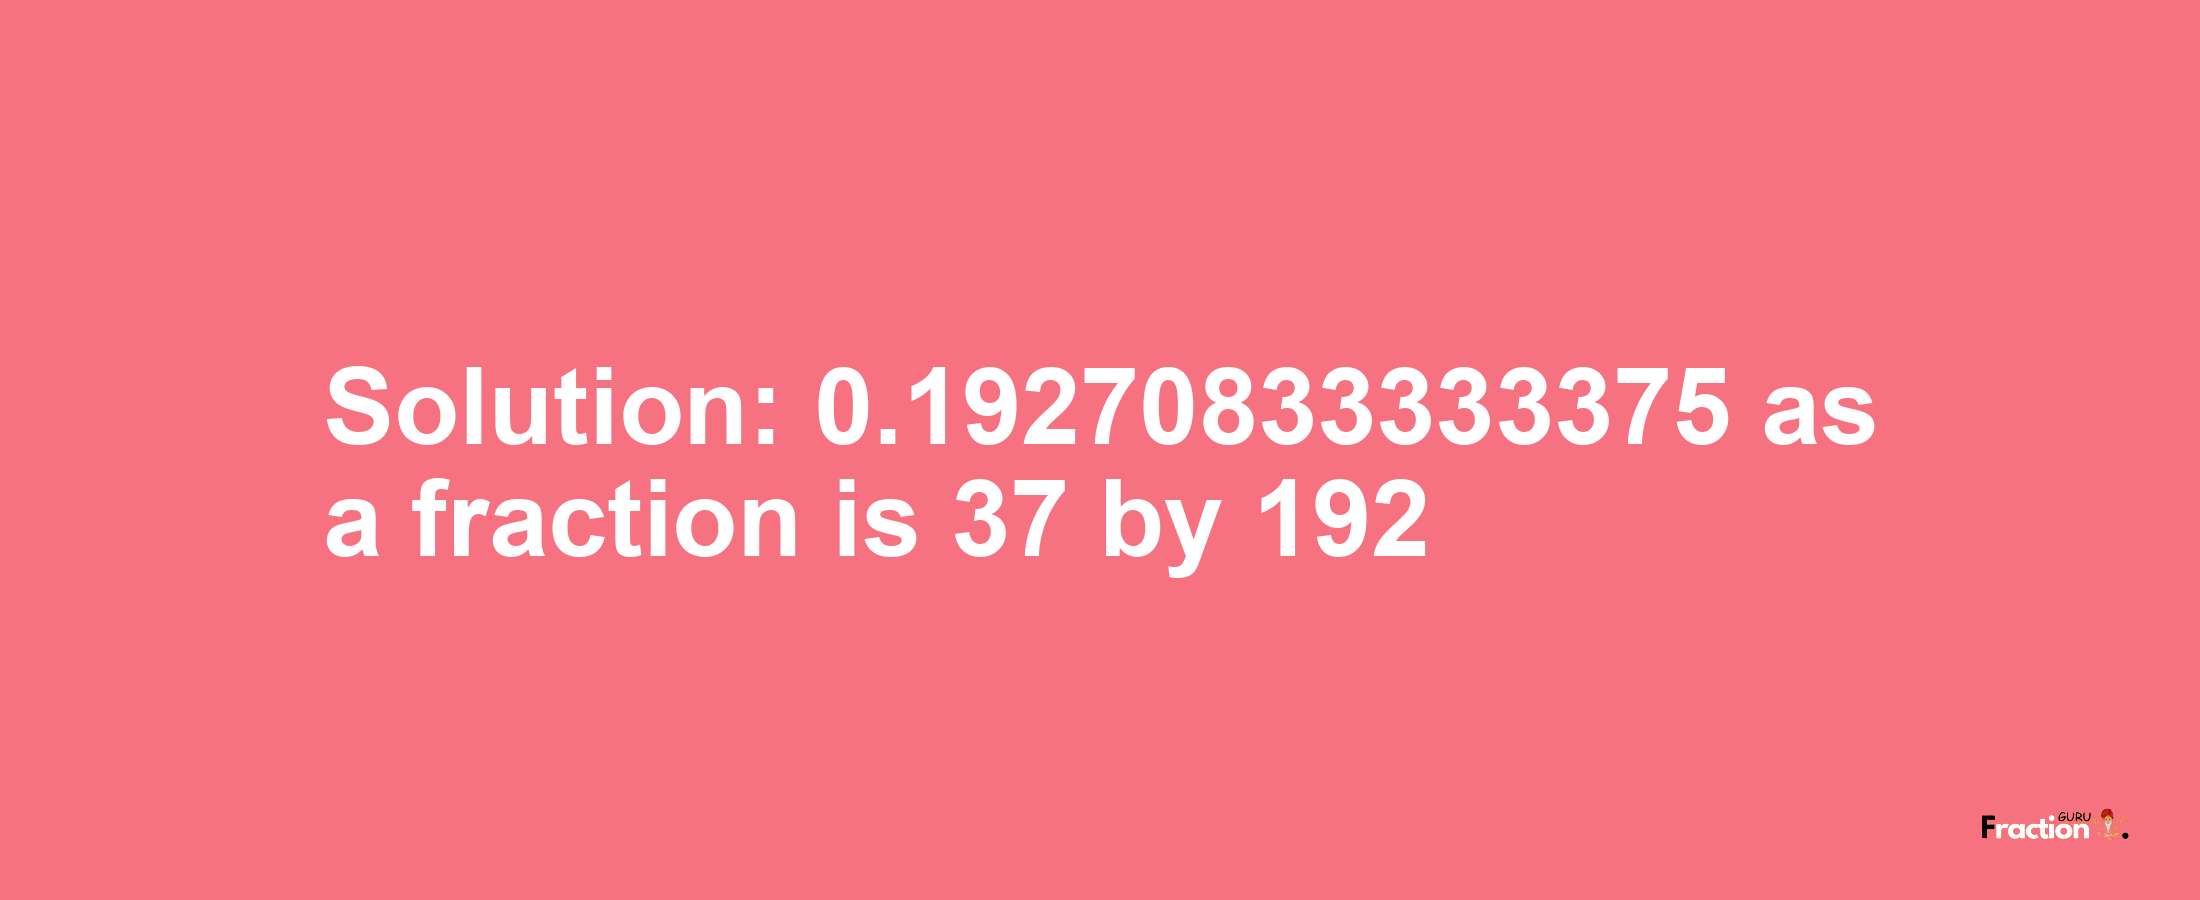 Solution:0.19270833333375 as a fraction is 37/192